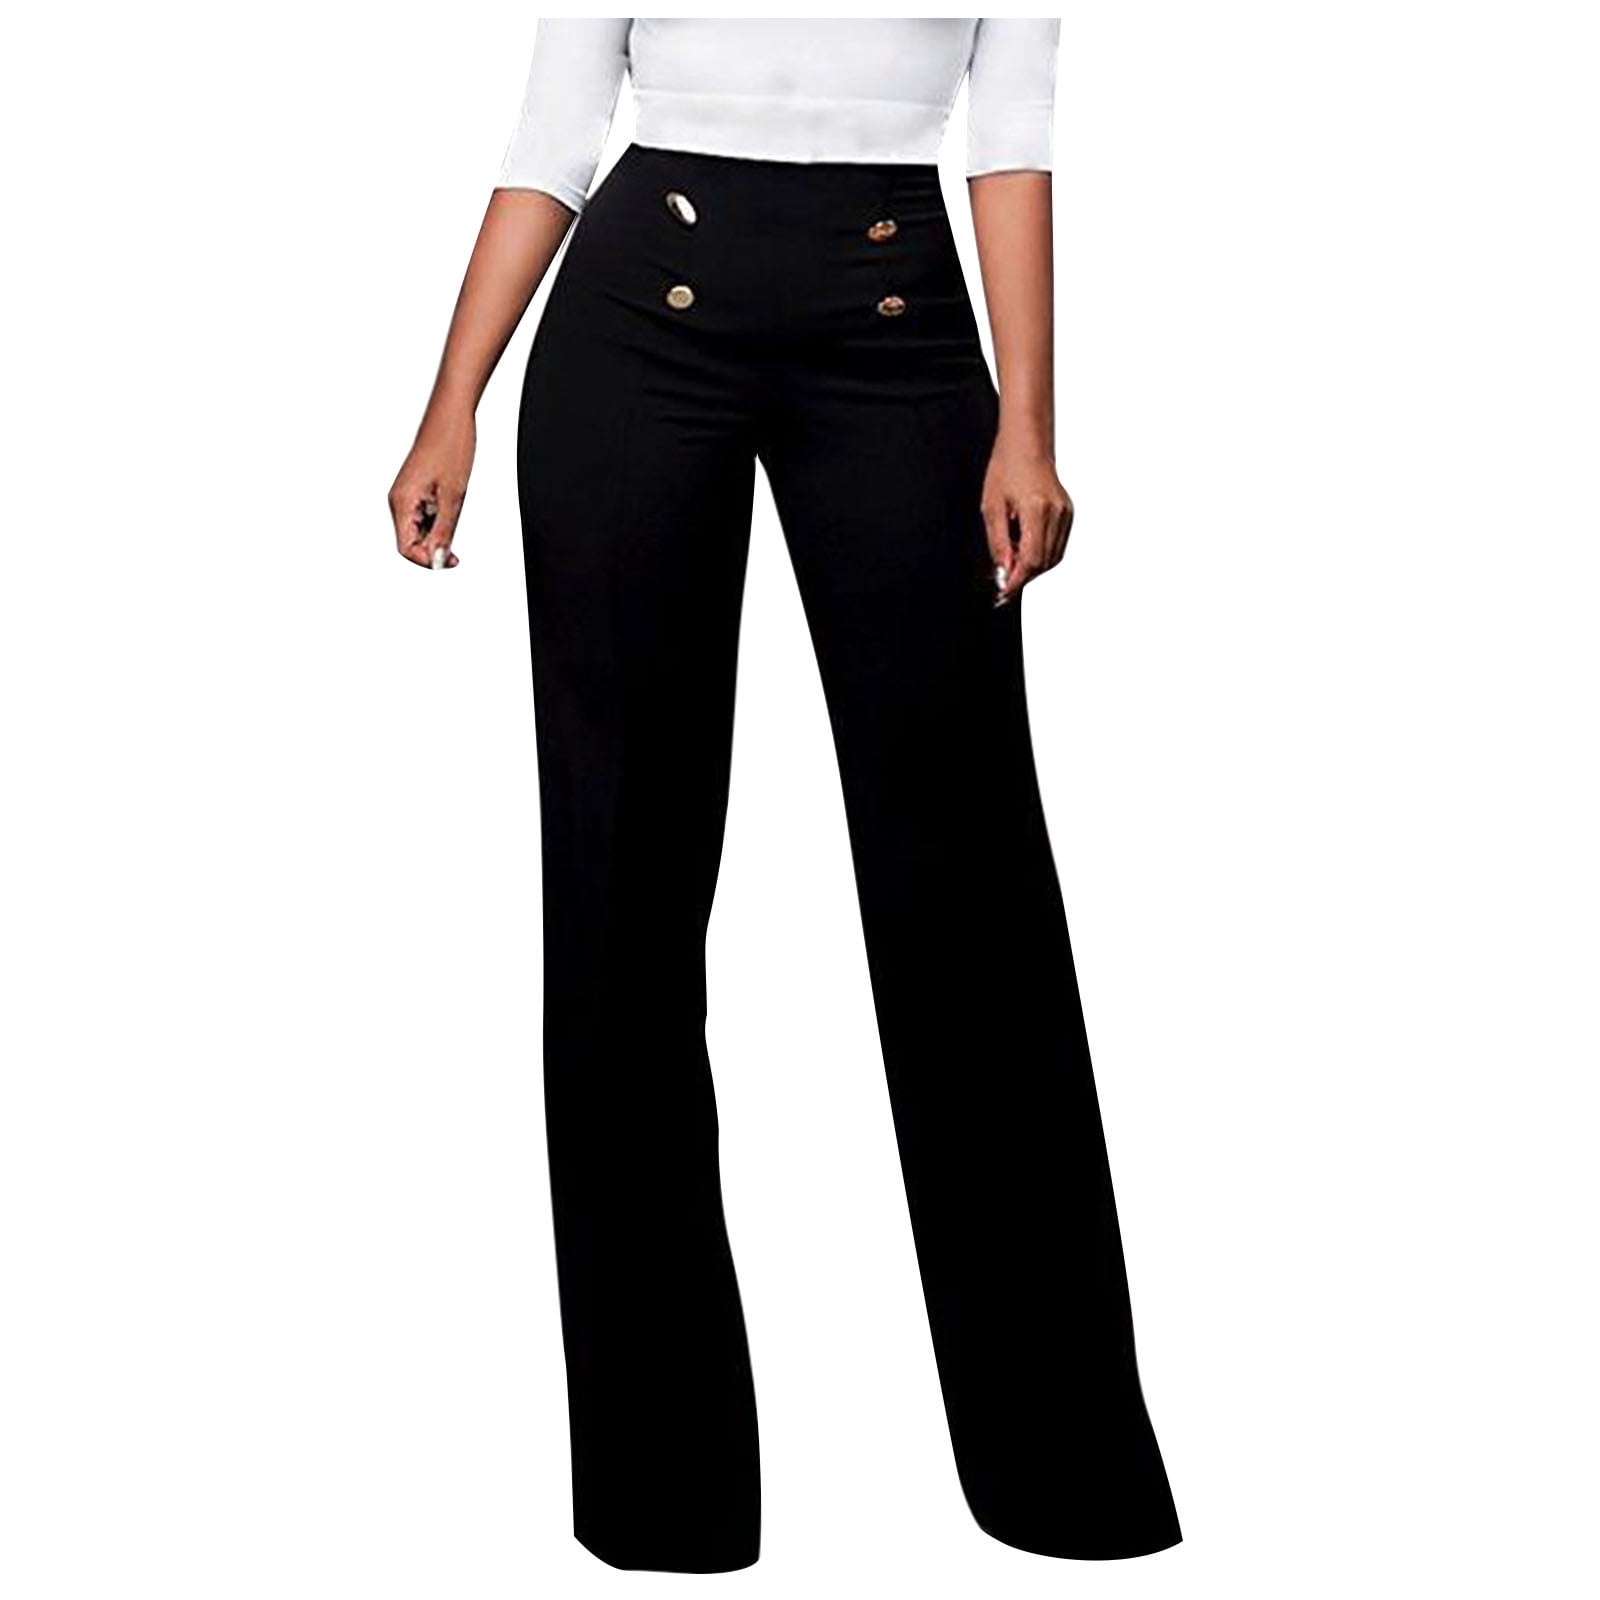 High Waisted Womens Office Pants For Ladies Casual, Thin, Loose Fit With  Large Yards And Nine Straight Design In Black For Summer 210915 From Bai05,  $26.59